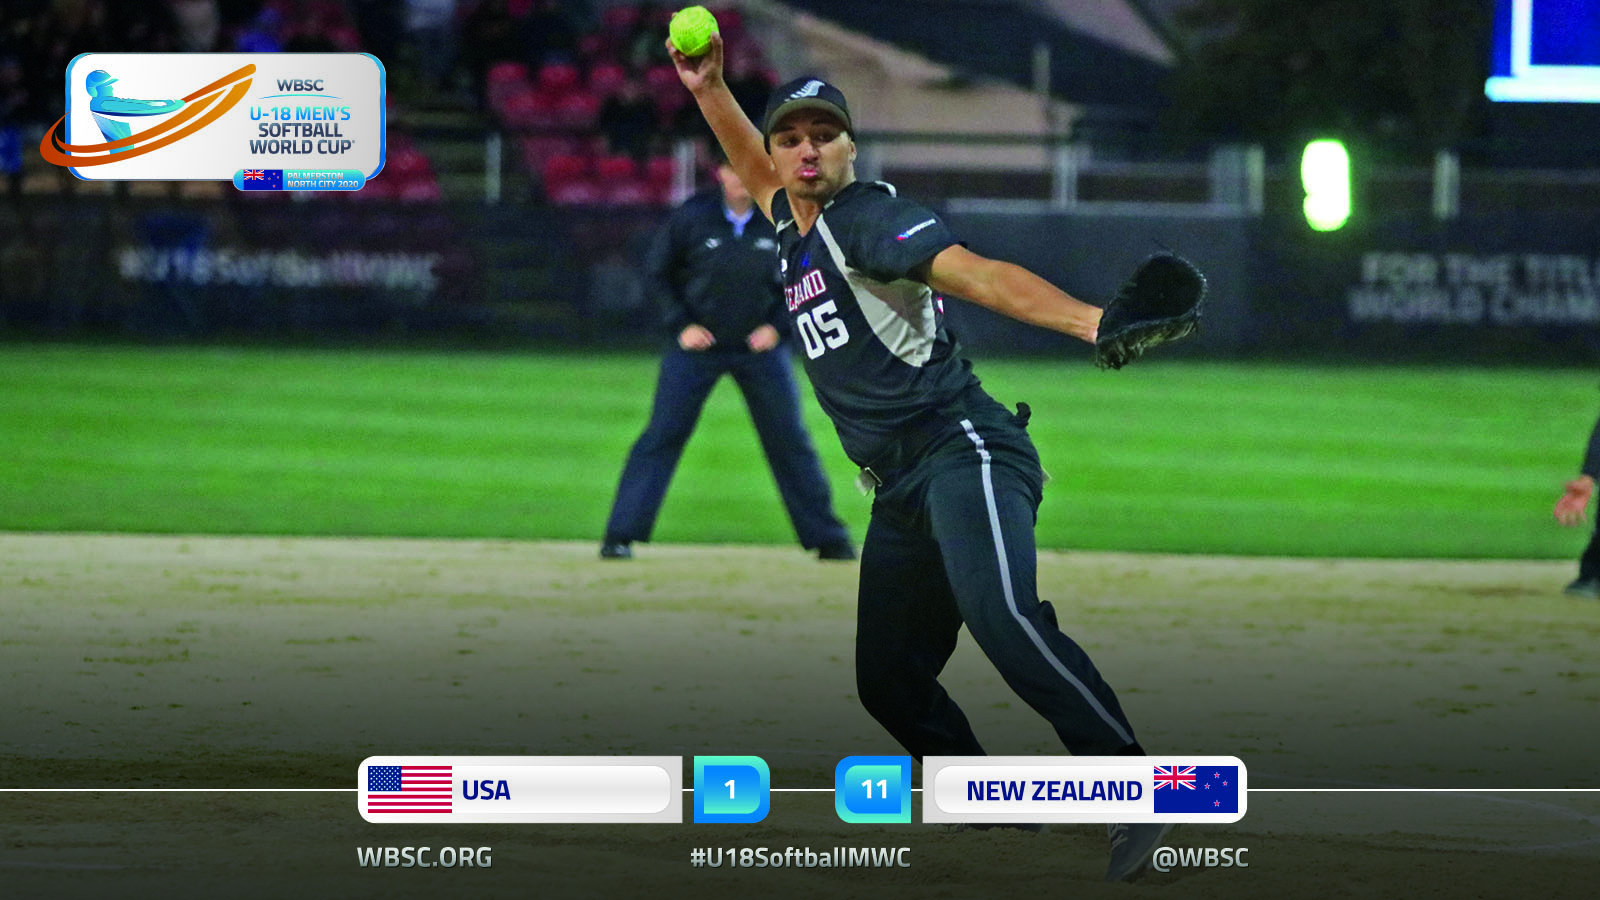 Hosts New Zealand record first win at Under-18 Men's Softball World Cup